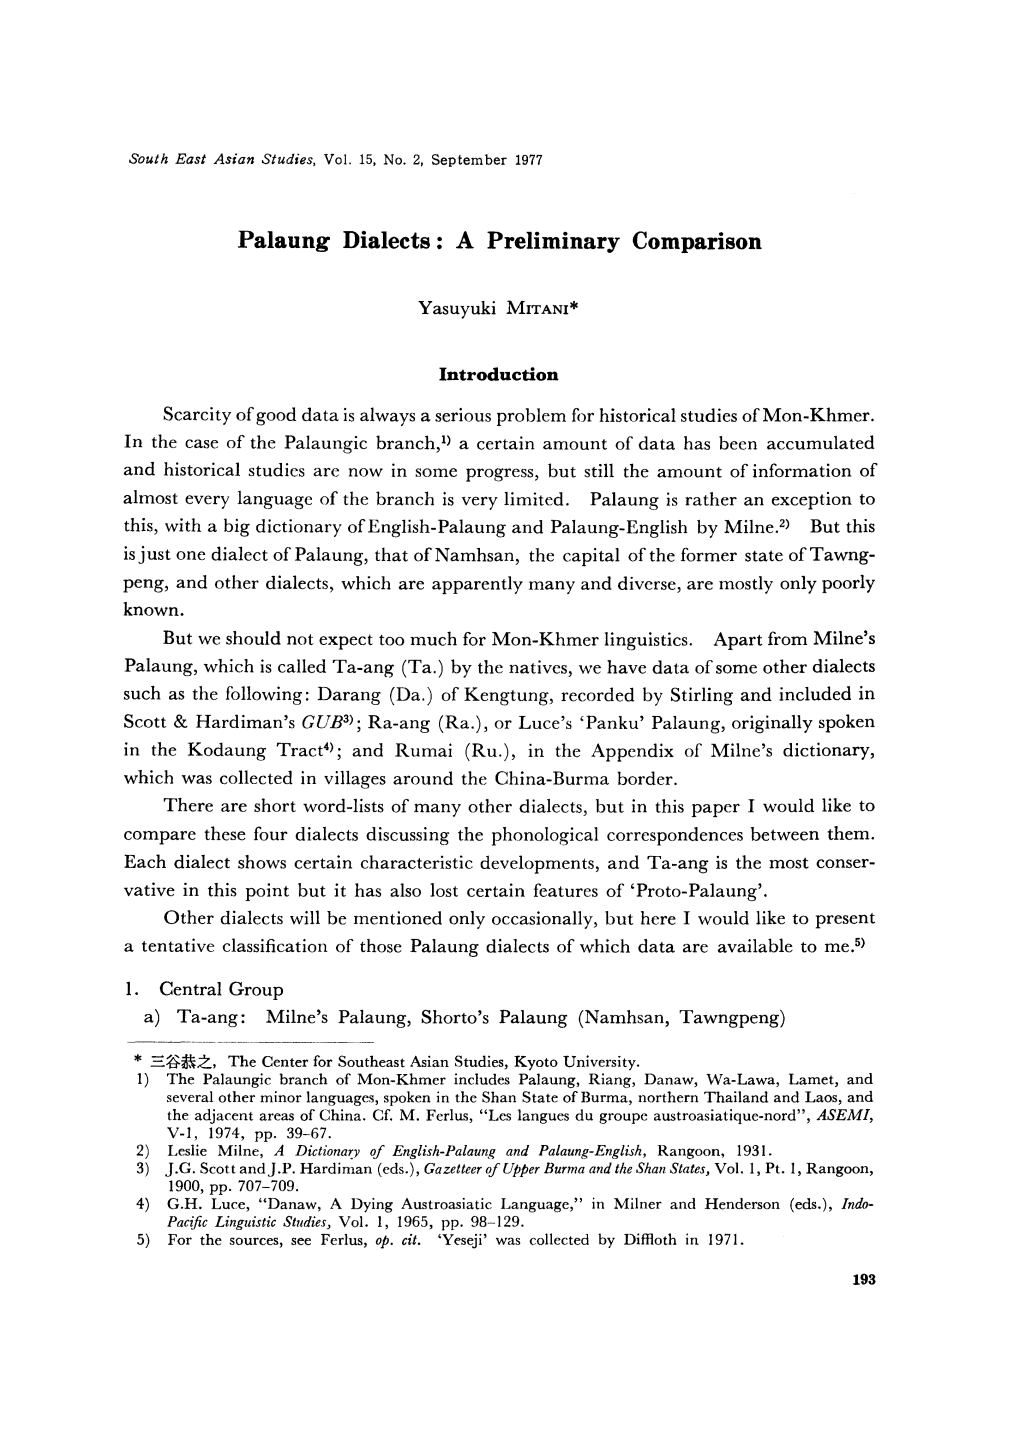 Palaung Dialects: a Preliminary Comparison